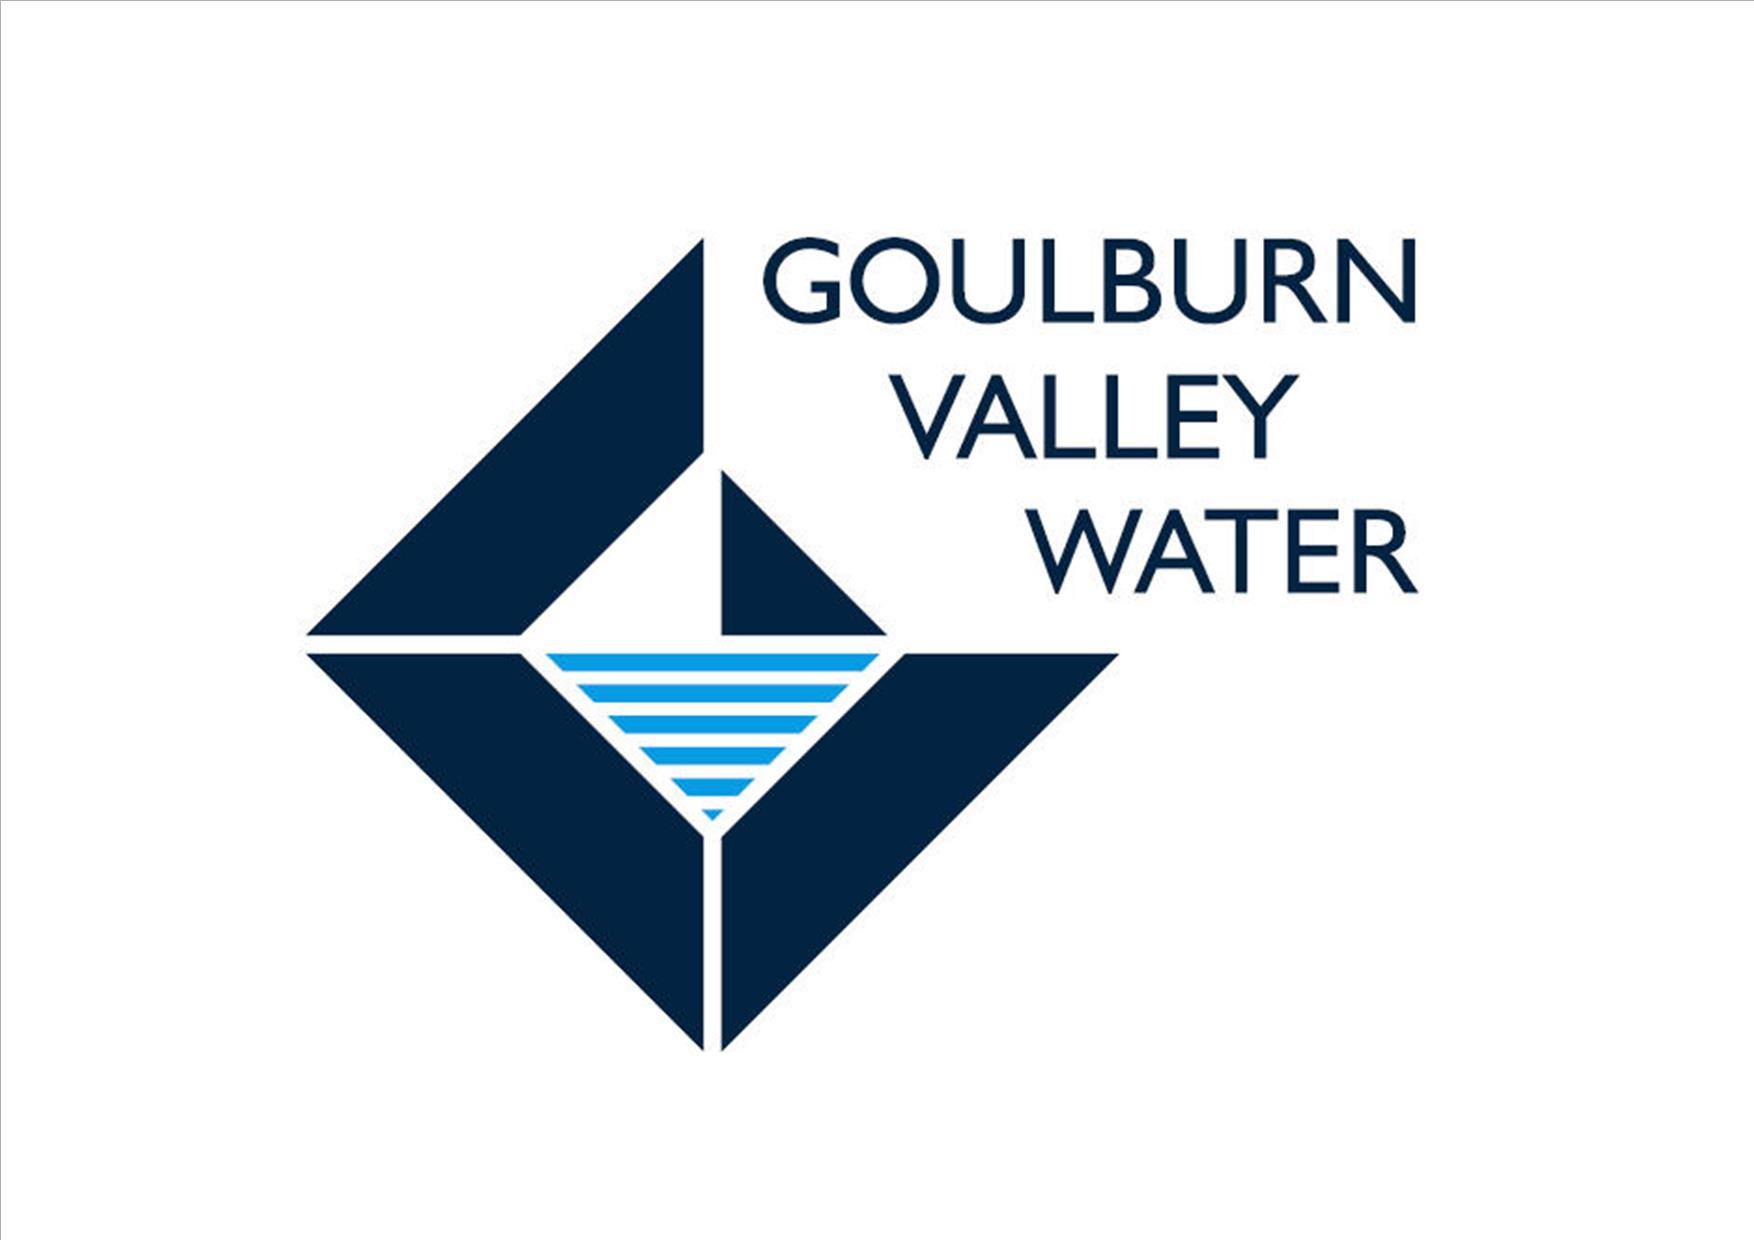 Company logo of Goulburn Valley Water